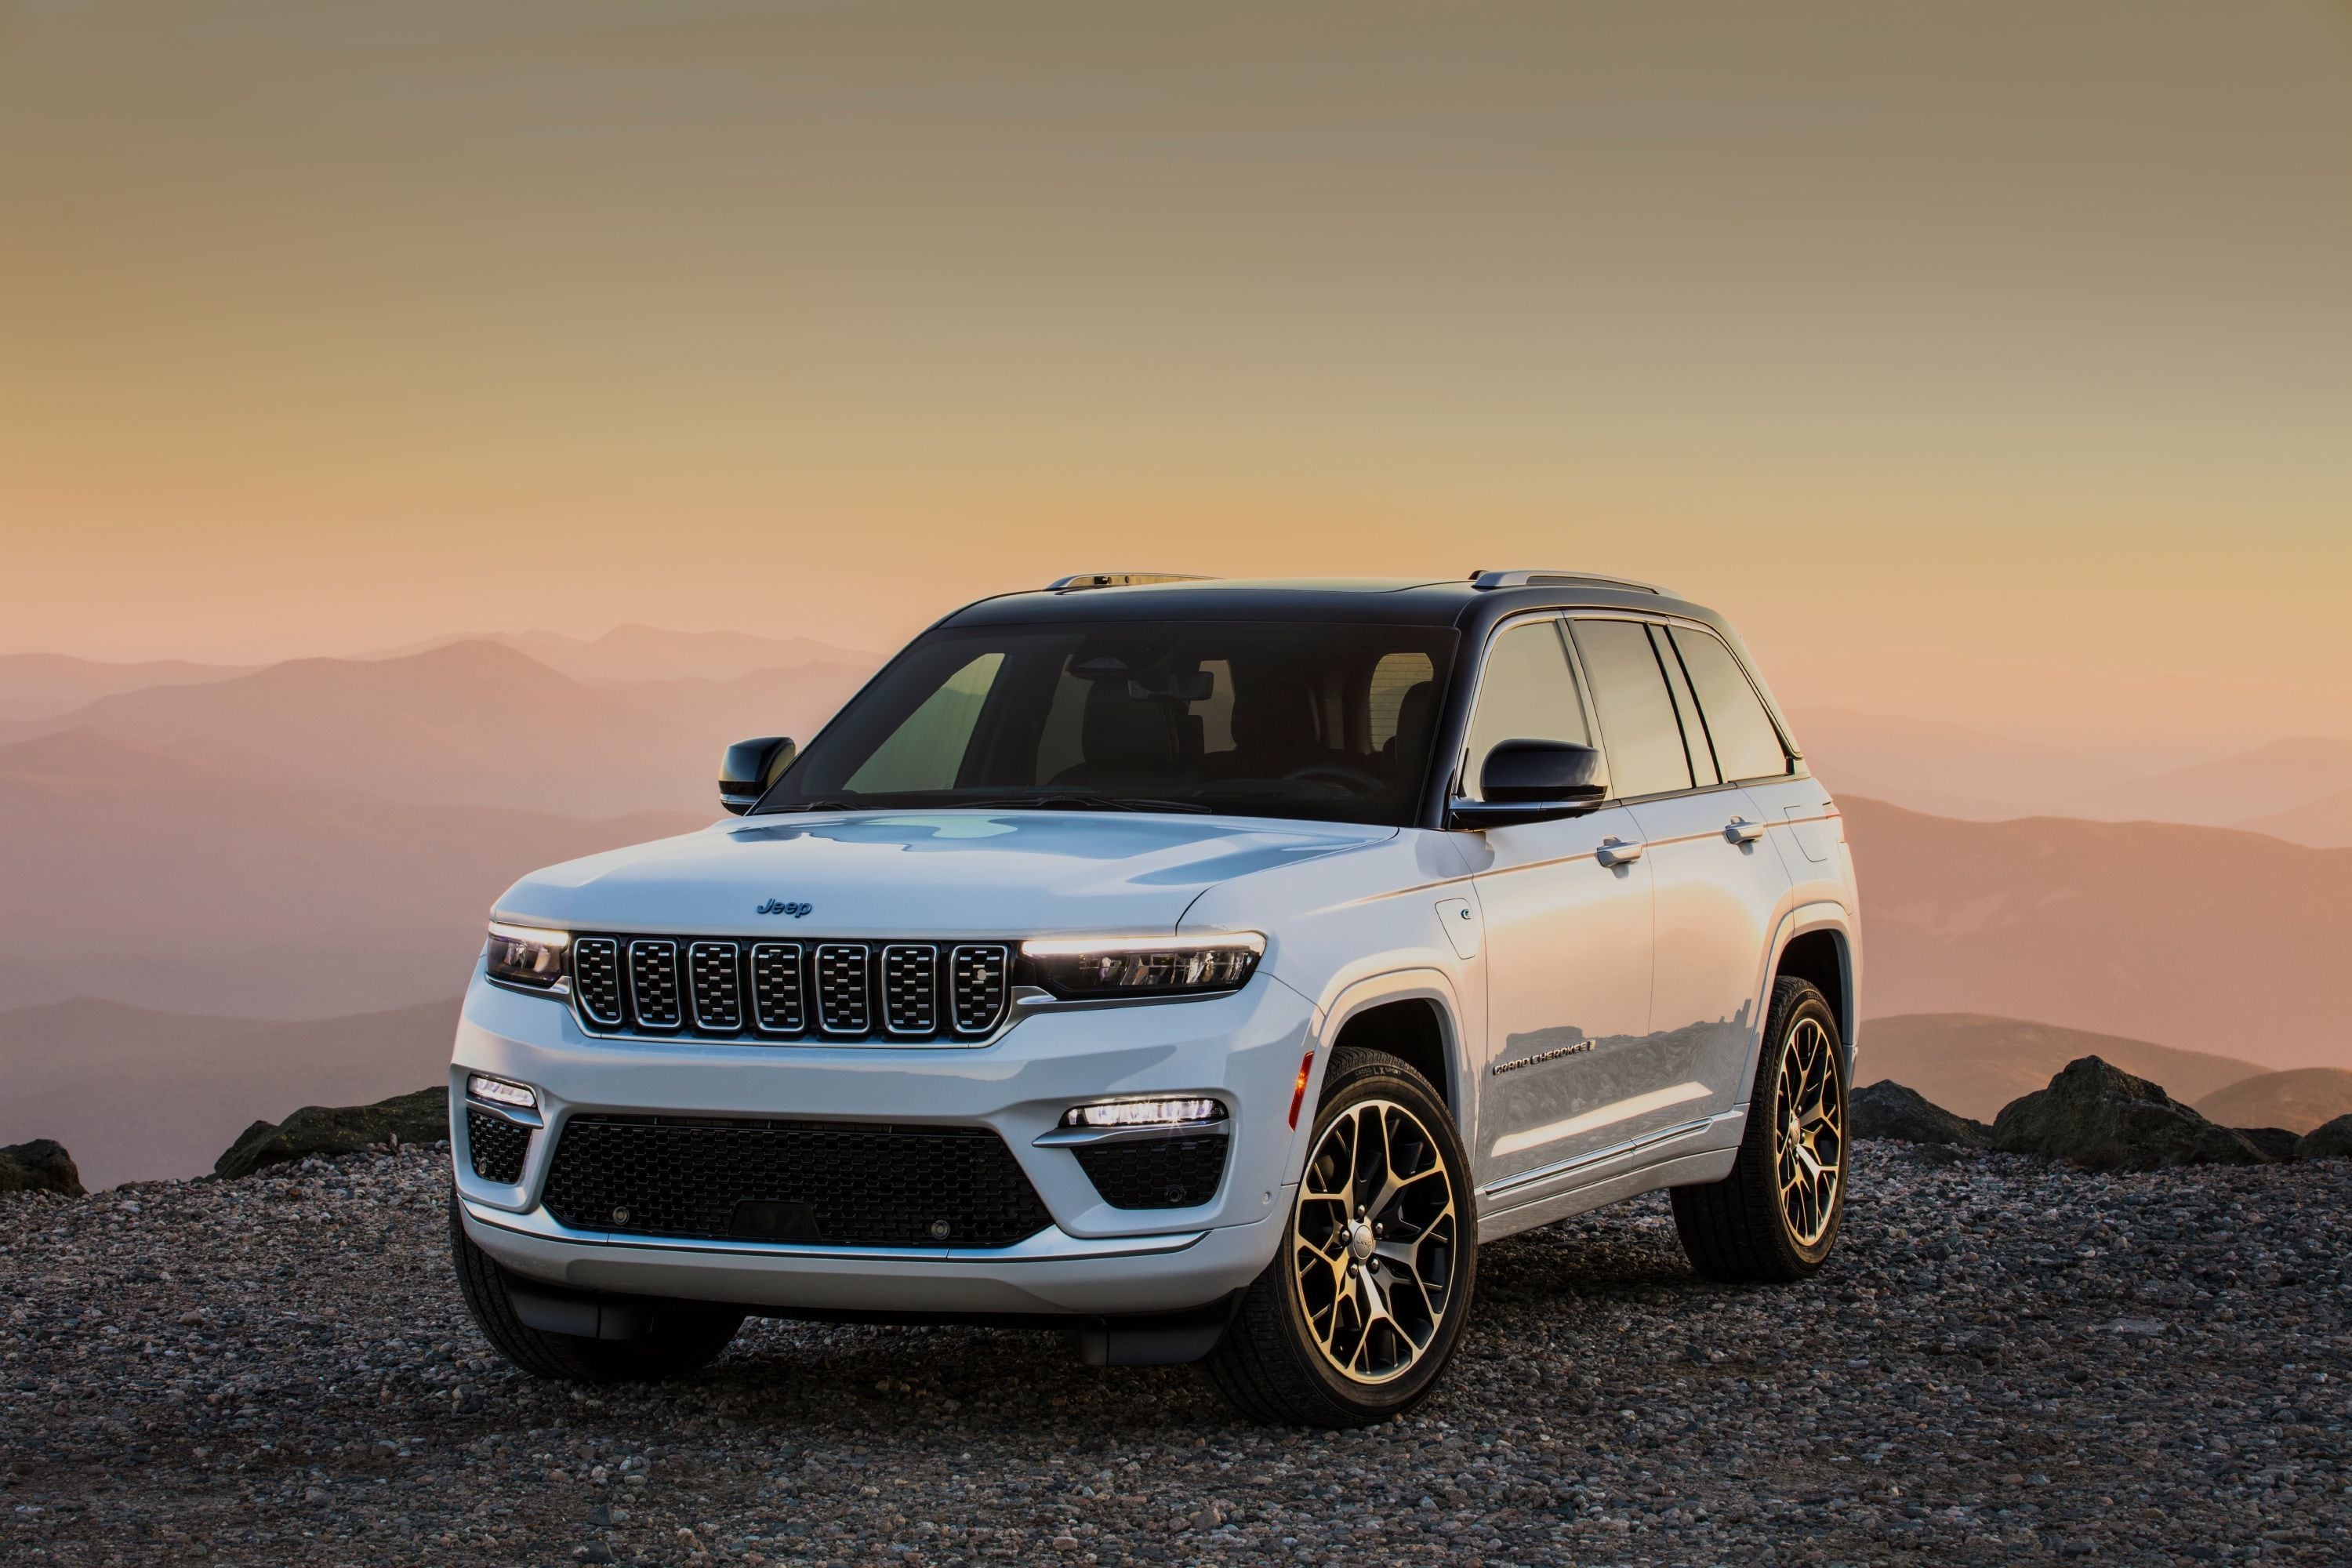 2023 Jeep Grand Cherokee 4xe: One part smooth, one part rough